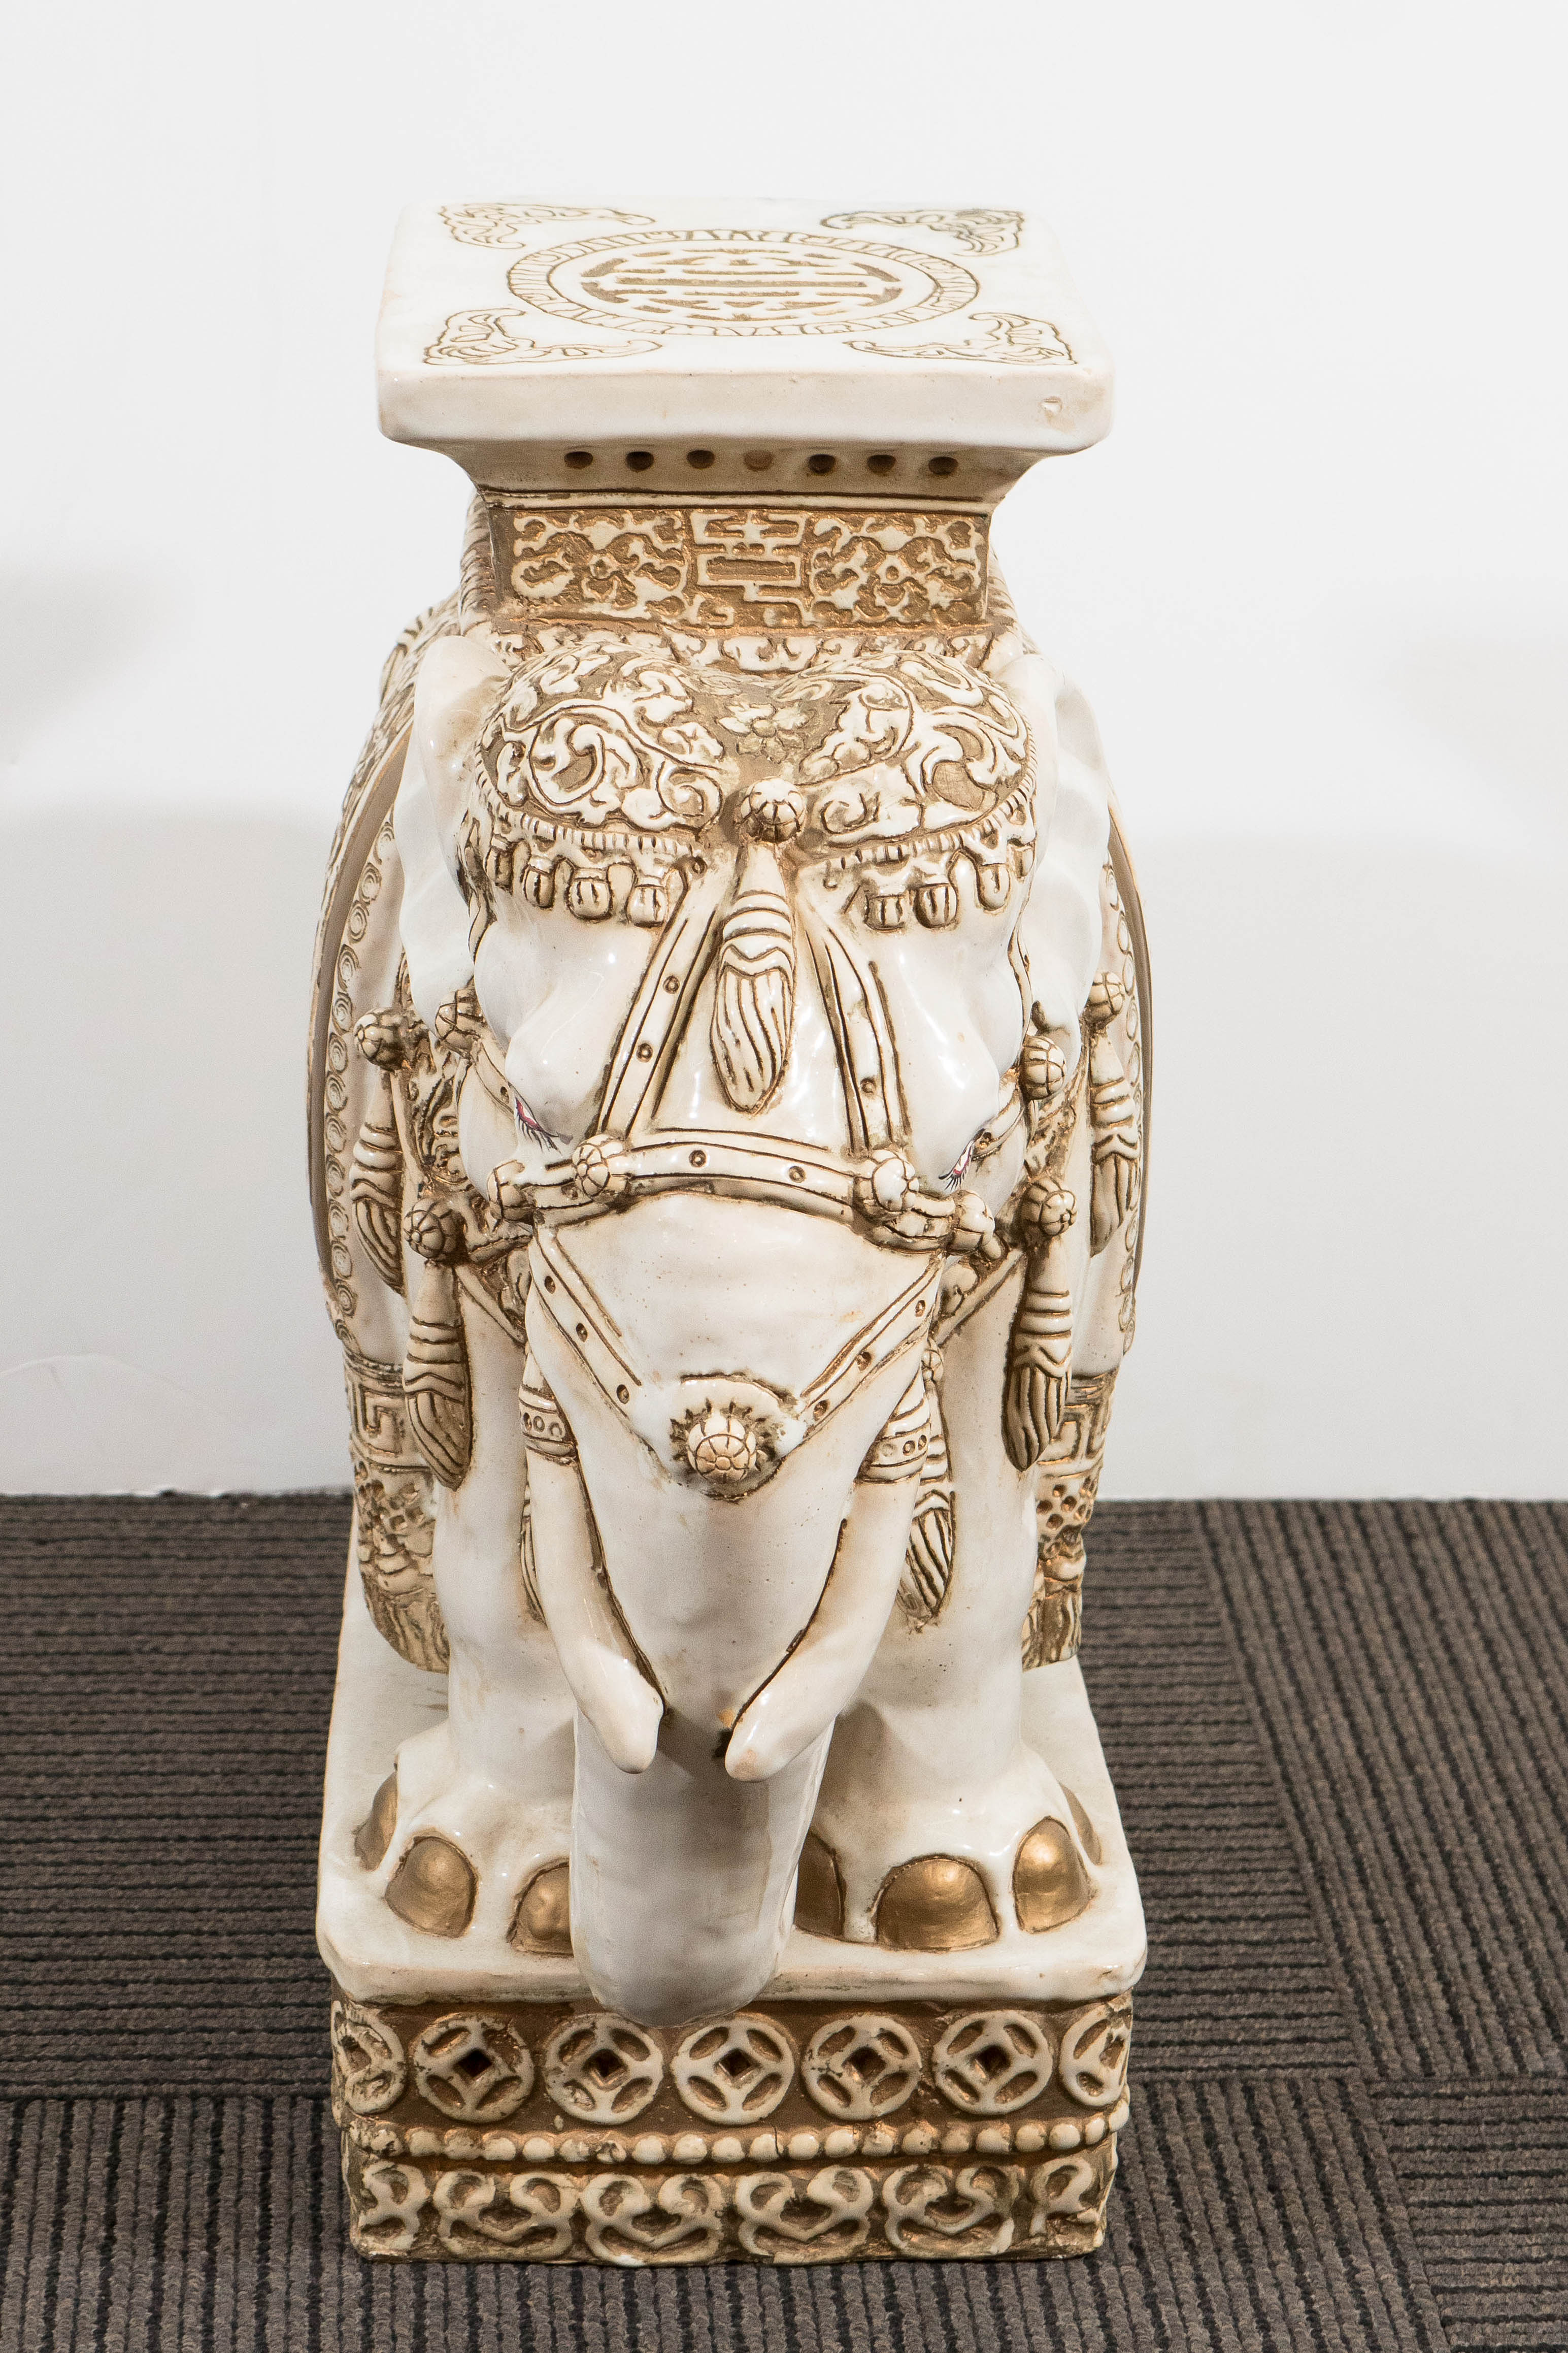 A vintage pair of glazed ceramic sculptural elephant garden stools, in off-white color with gold details, incised with all-over pattern. Good vintage condition, some stains and a small crack on the surface of the ‘belly’ of one of the elephants. Can